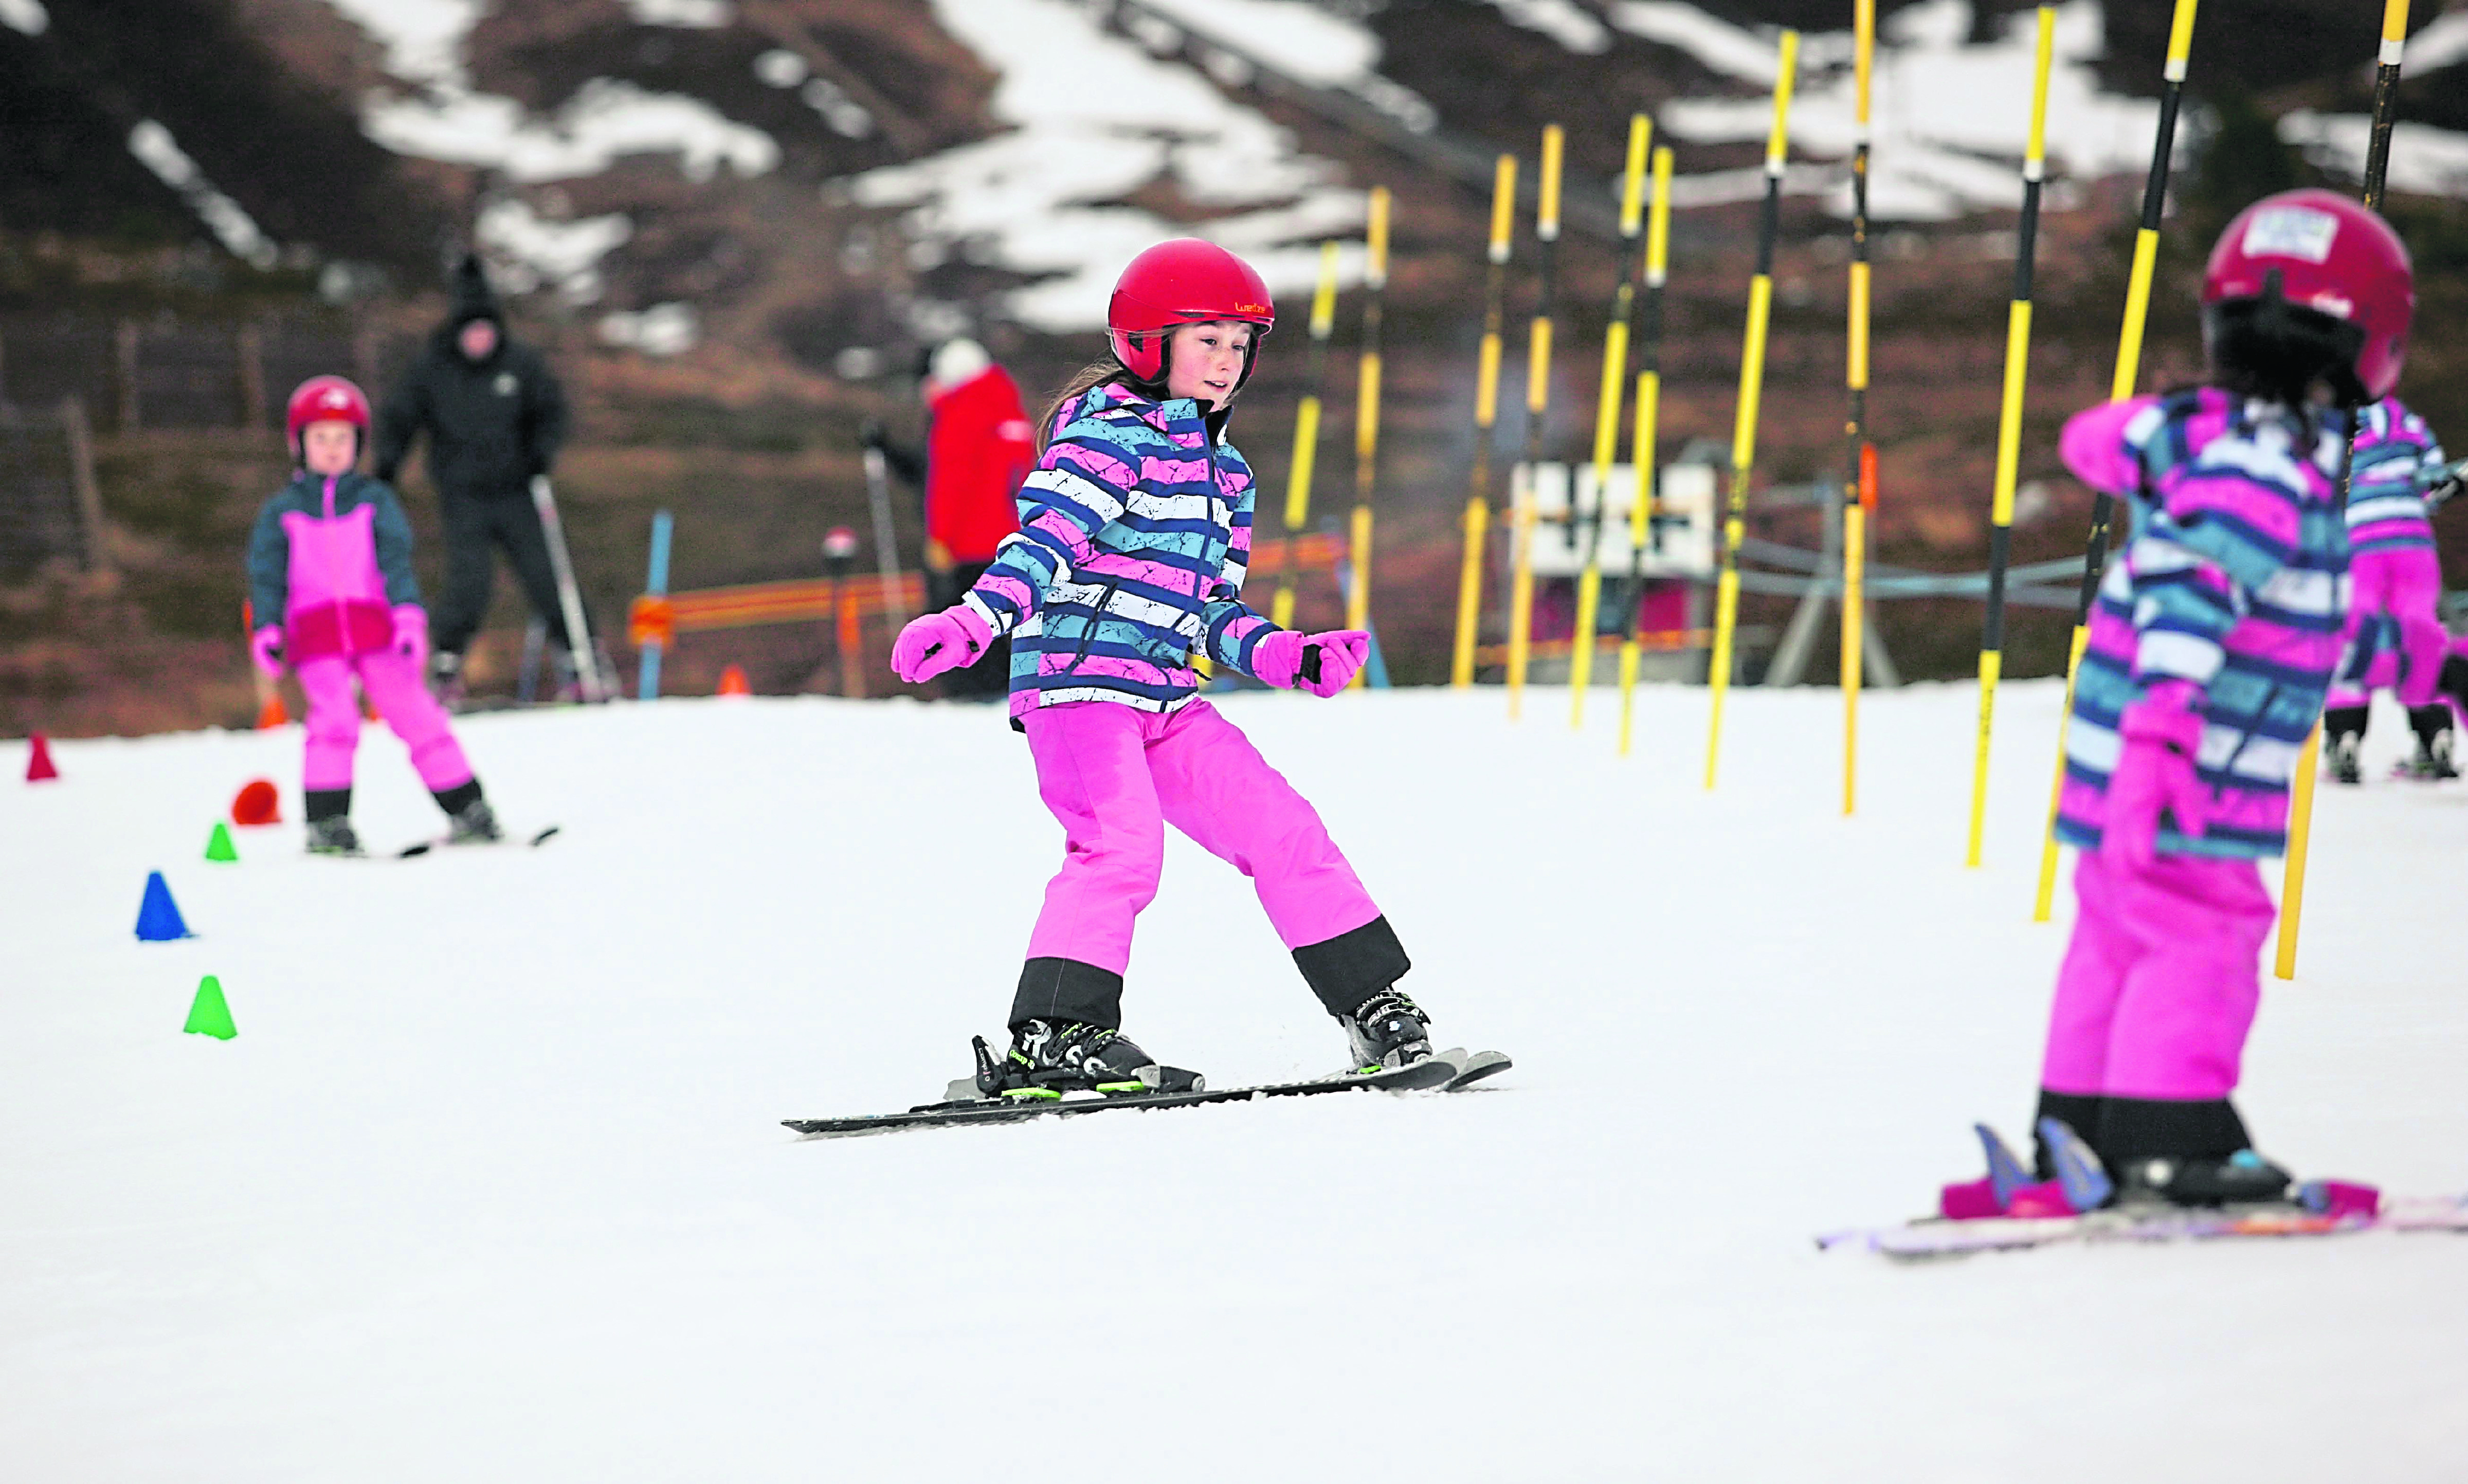 The Doherty sisters from Ireland who were enjoying their first ski holiday at Cairngorm Mountain. Picture by Peter Jolly.